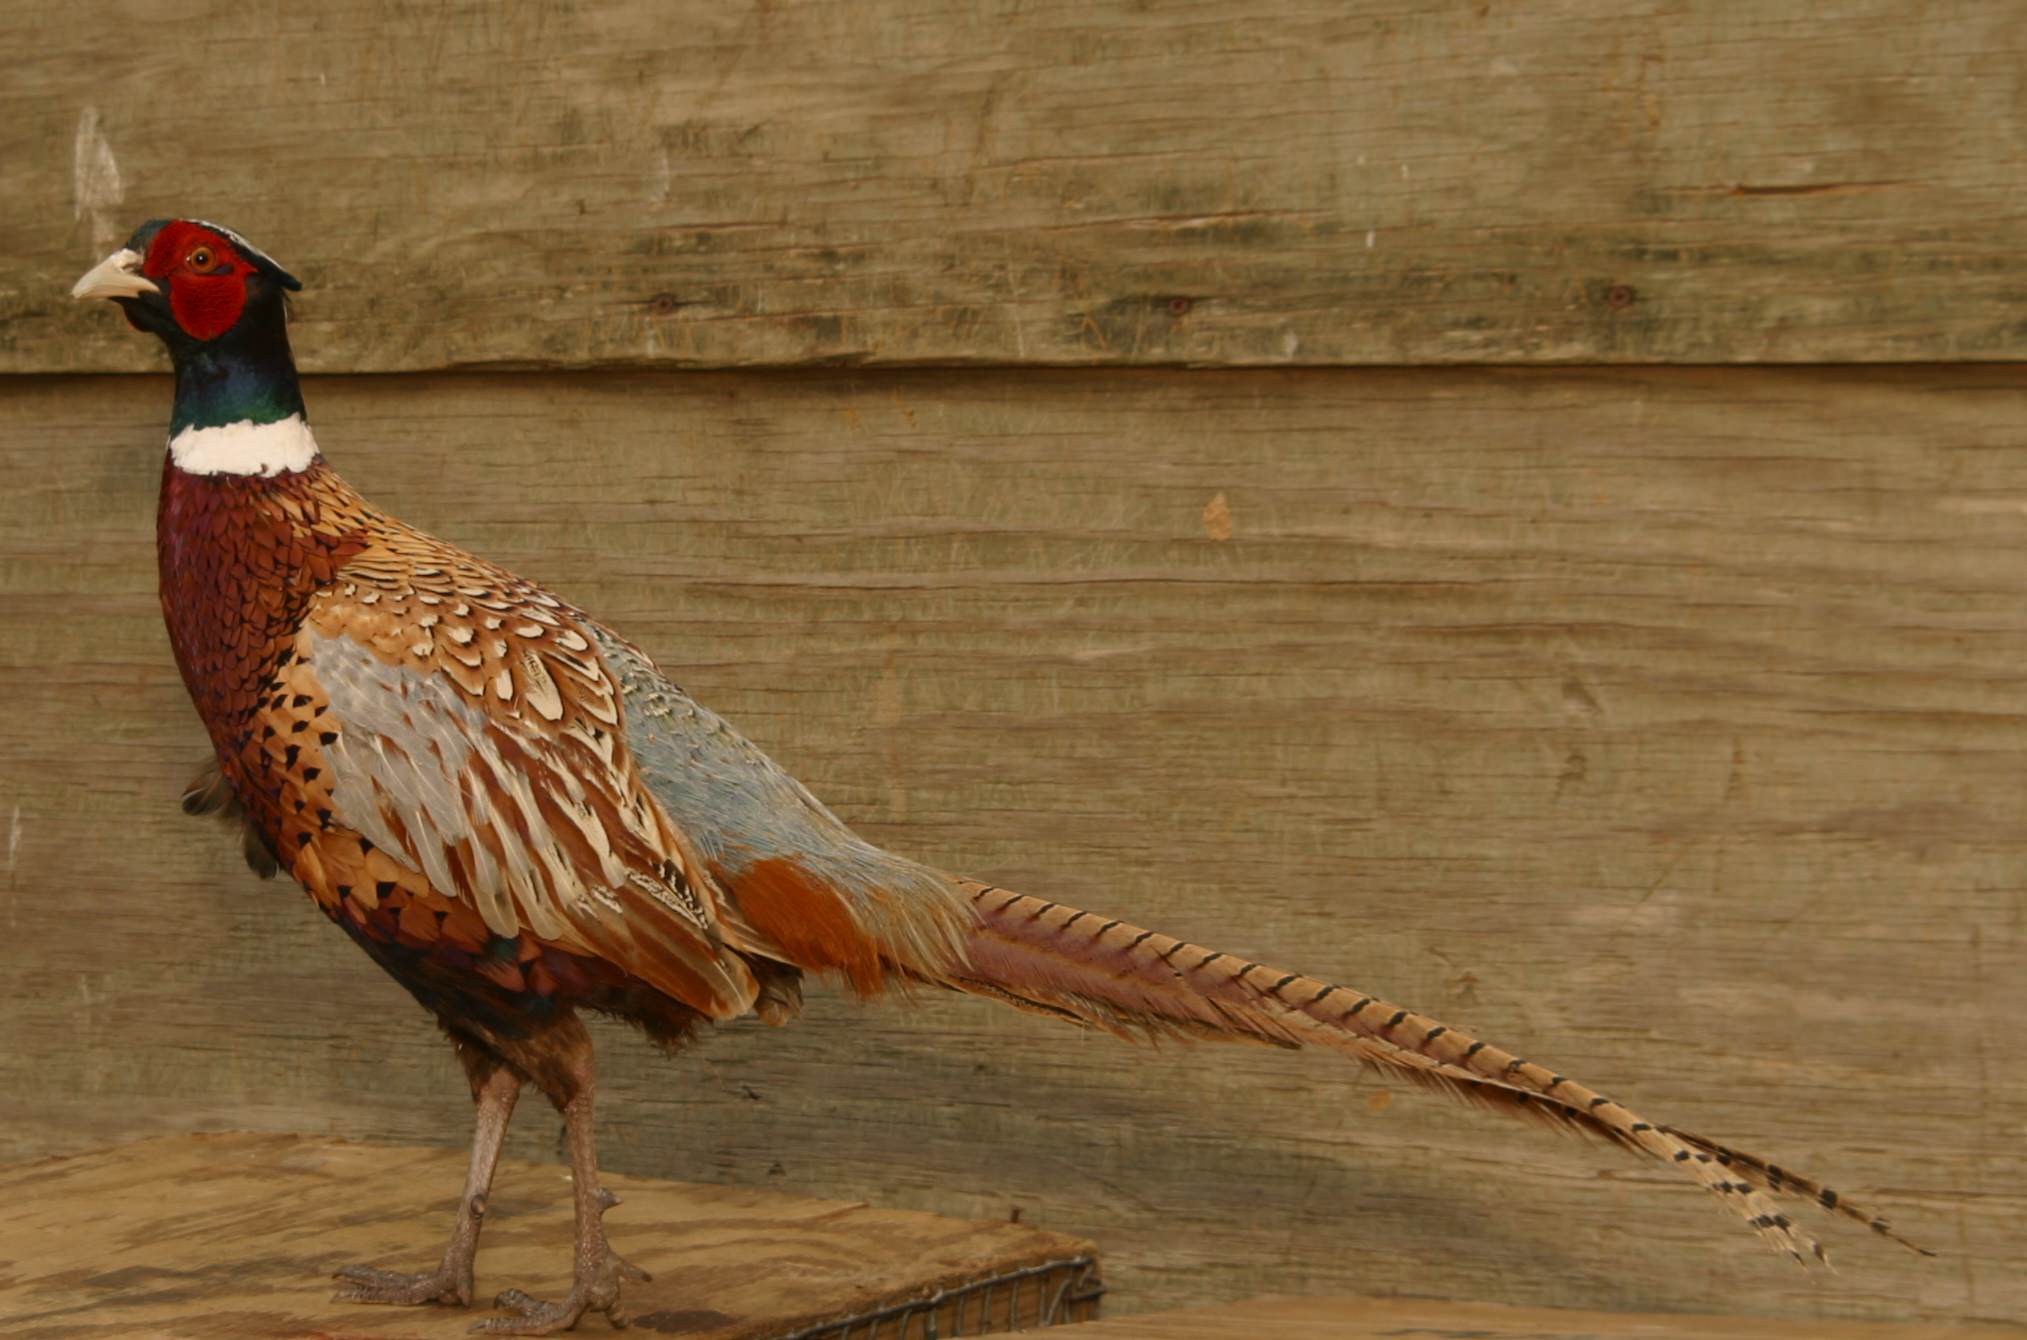 Pheasant traits hunters love to see in the wild